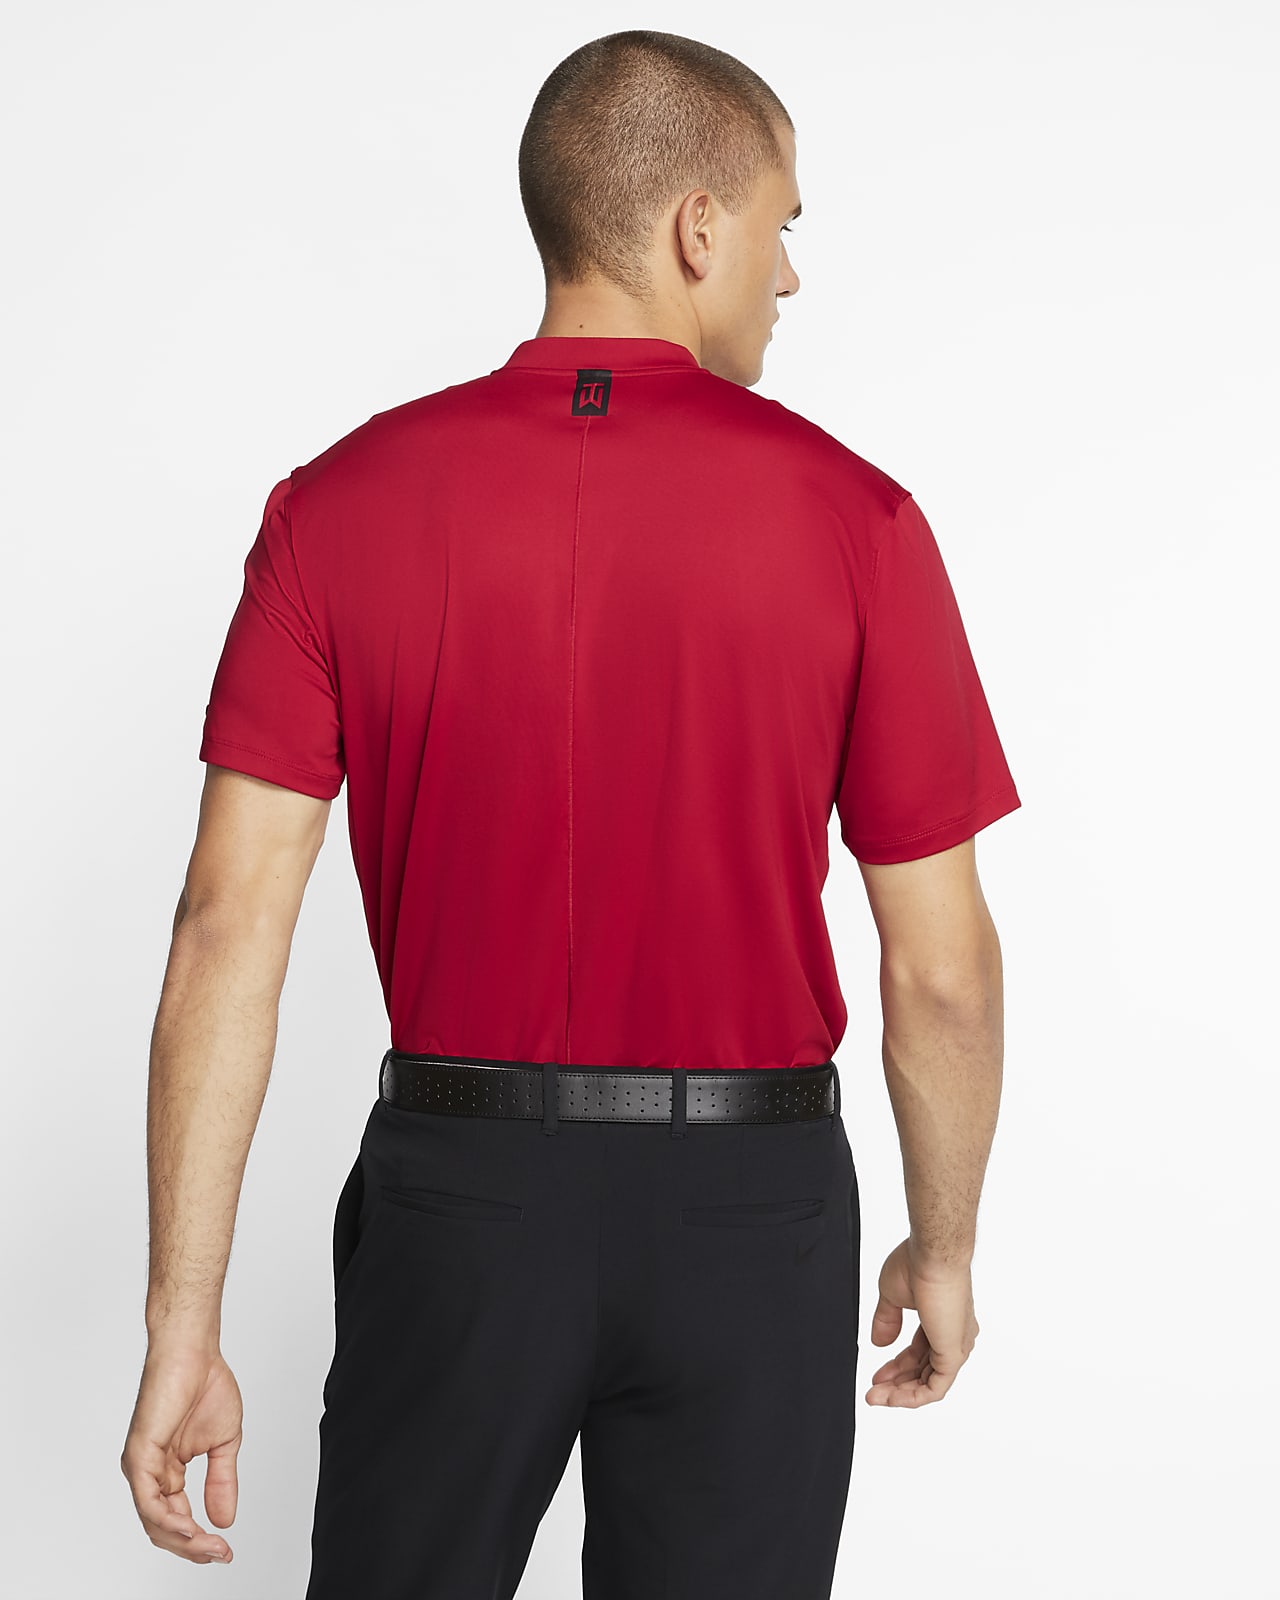 tiger woods tiger polo